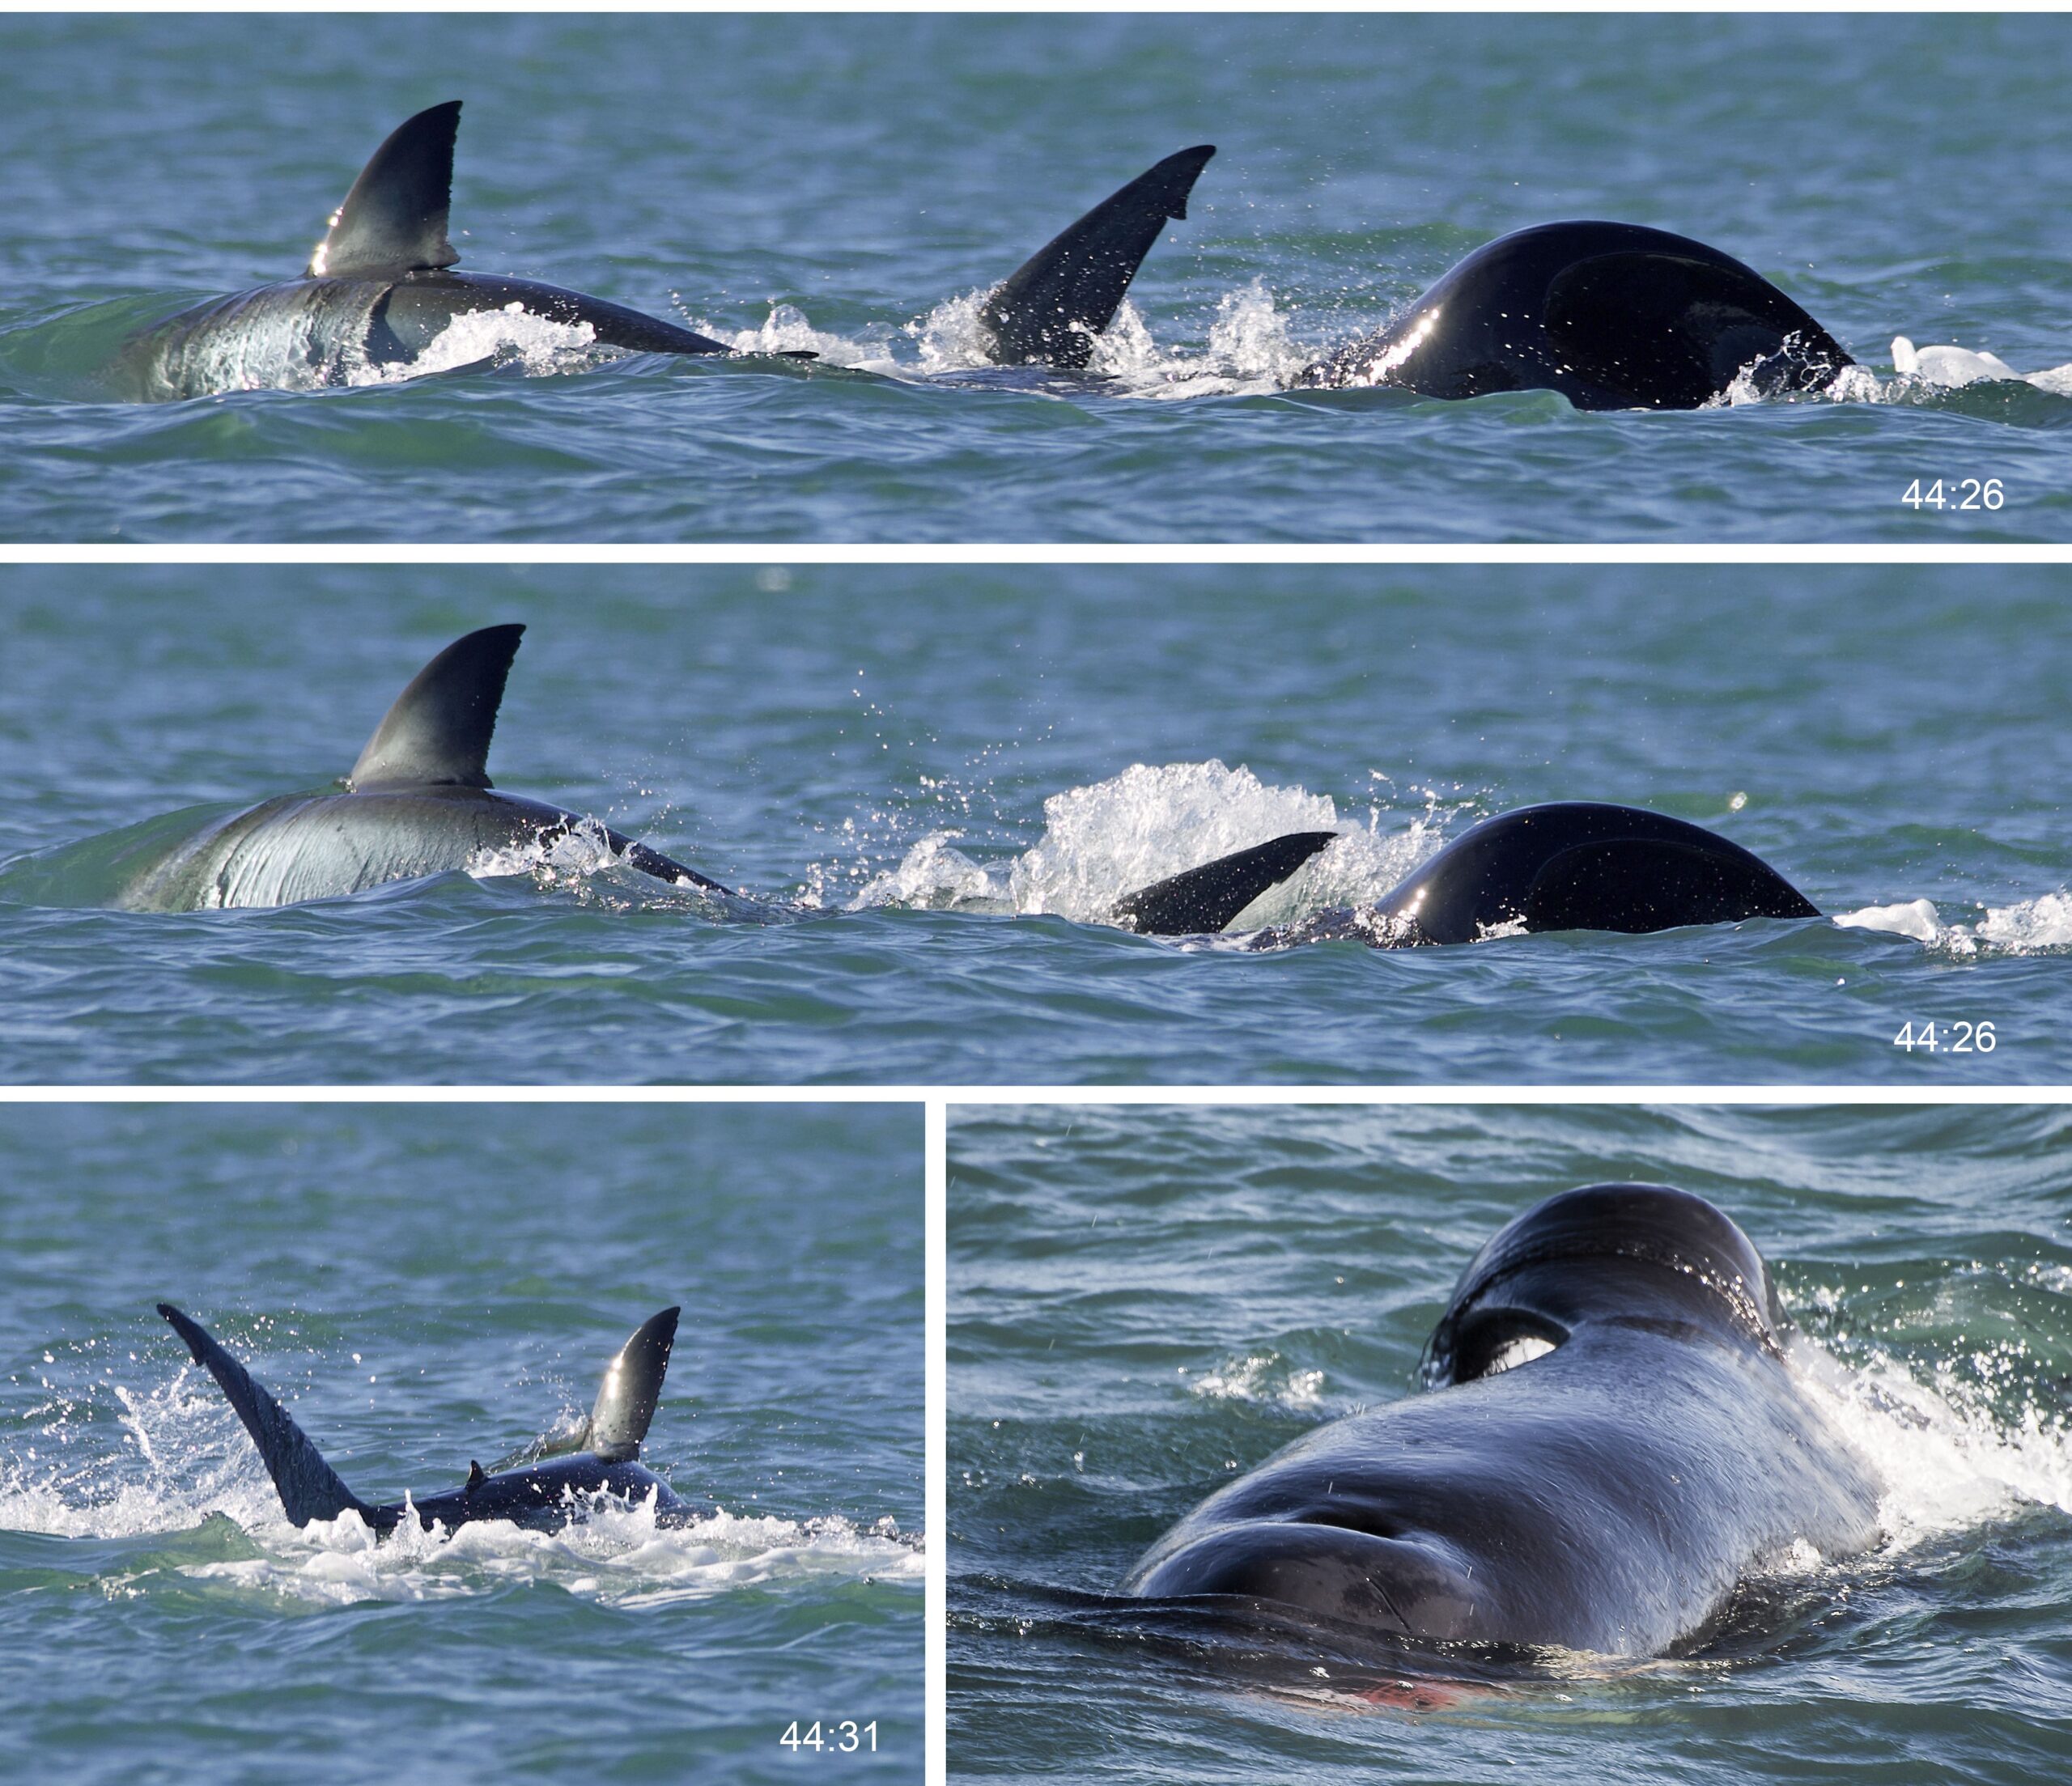 A timeline of an orca whale preying on a white shark. CREDIT: Christiaan Stopforth (Drone Fanatics SA) Arianna Di Bari (Shark Studies Center Scientific Institute).